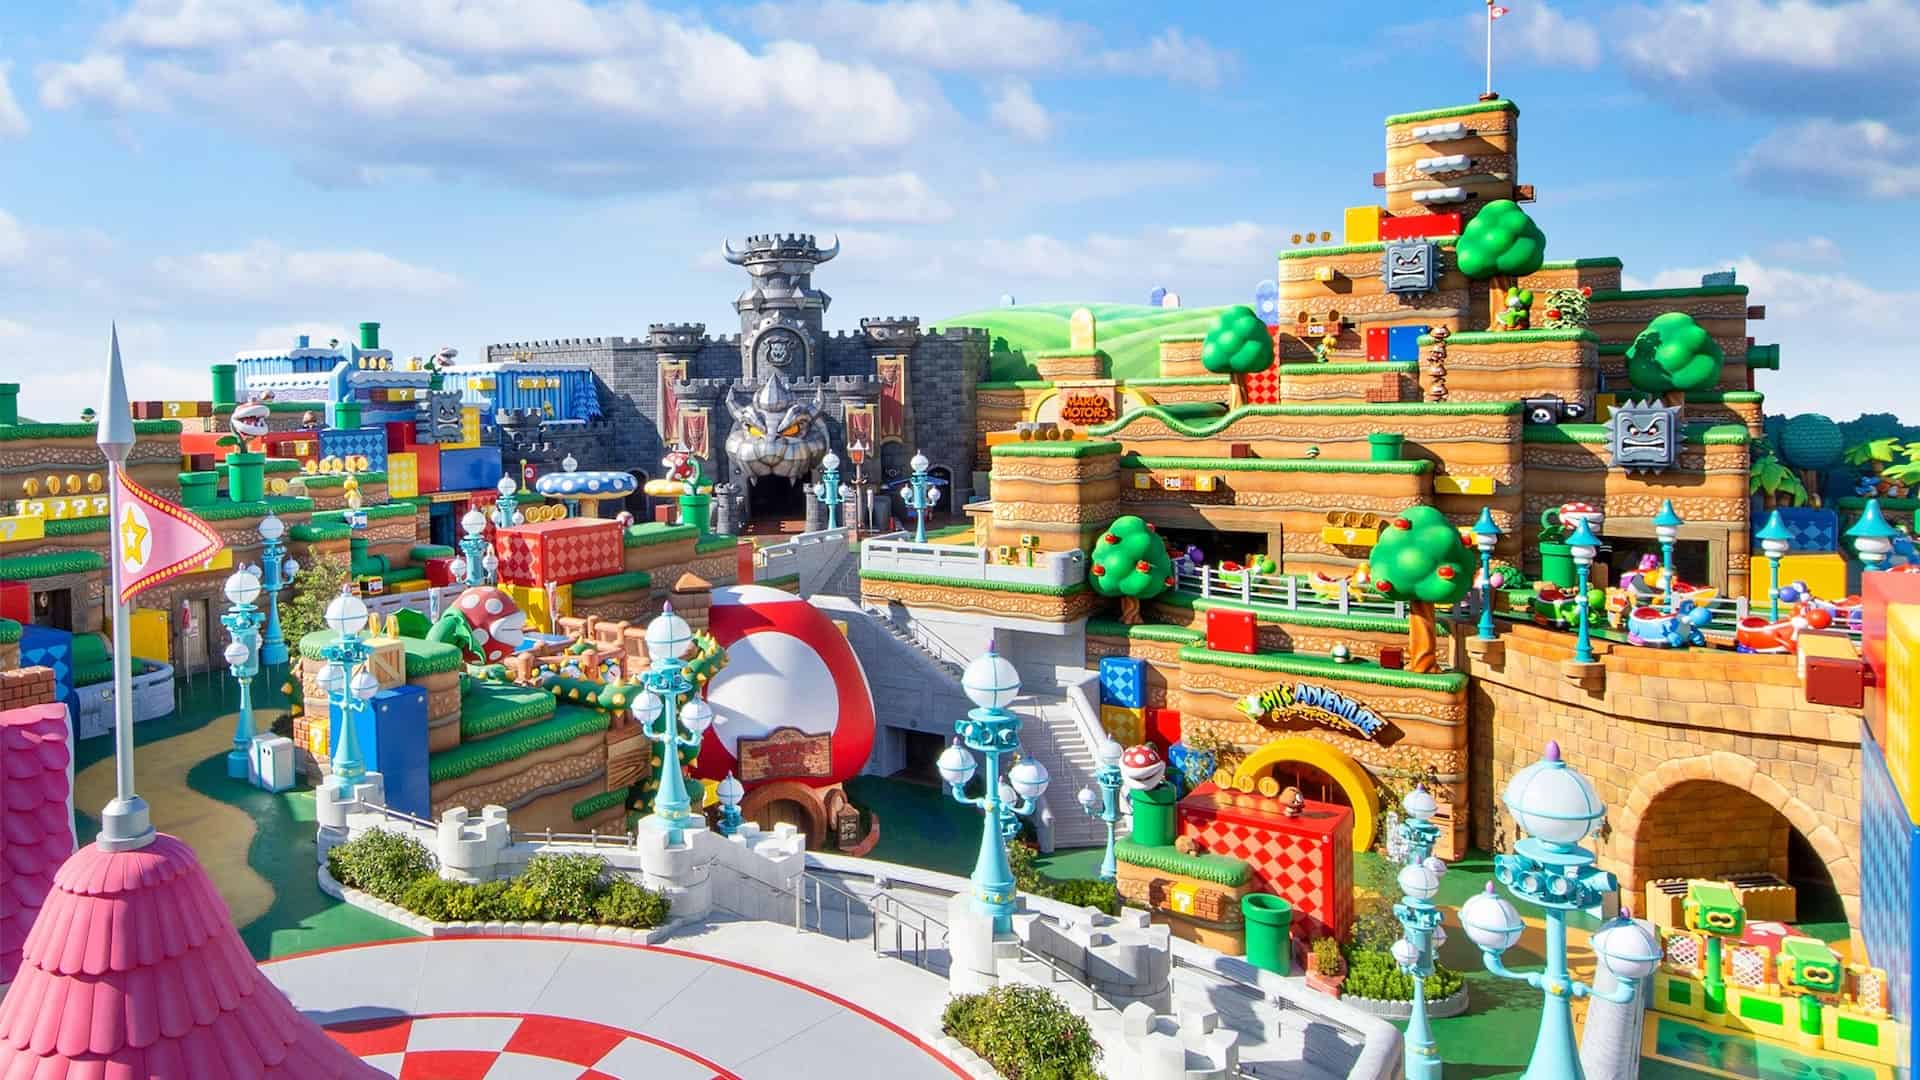 rendering of a large theme park with castle and bright blocks displayed